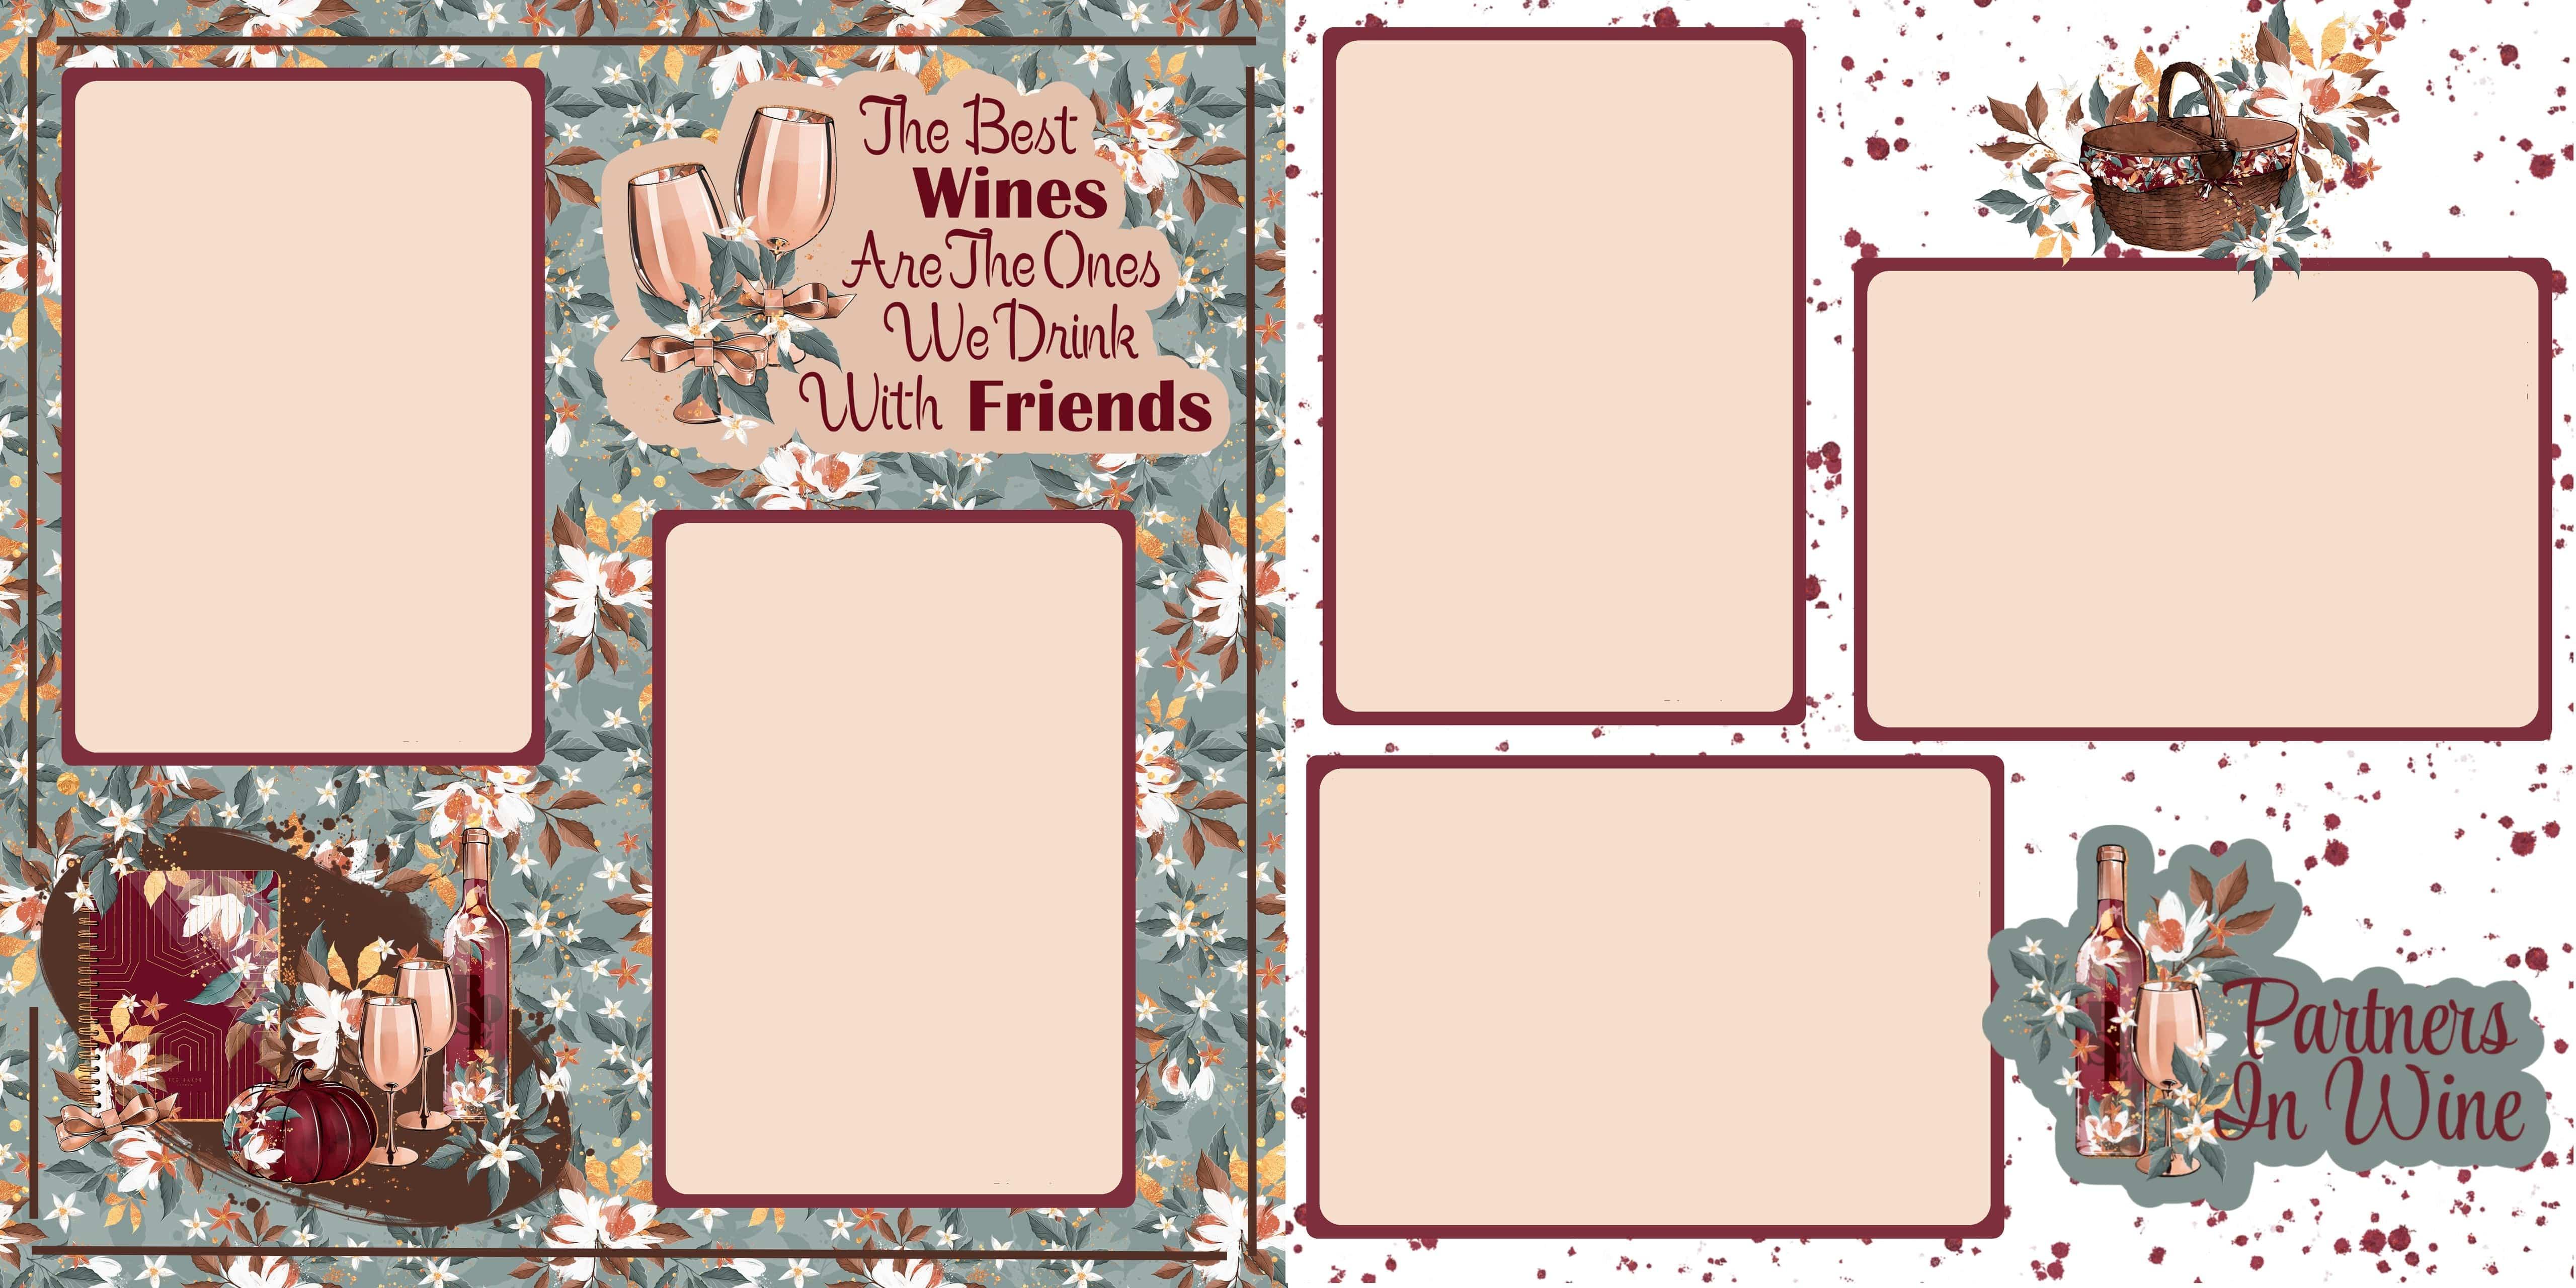 Partners In Wine (2) - 12 x 12 Premade, Printed Scrapbook Pages by SSC Designs - Scrapbook Supply Companies